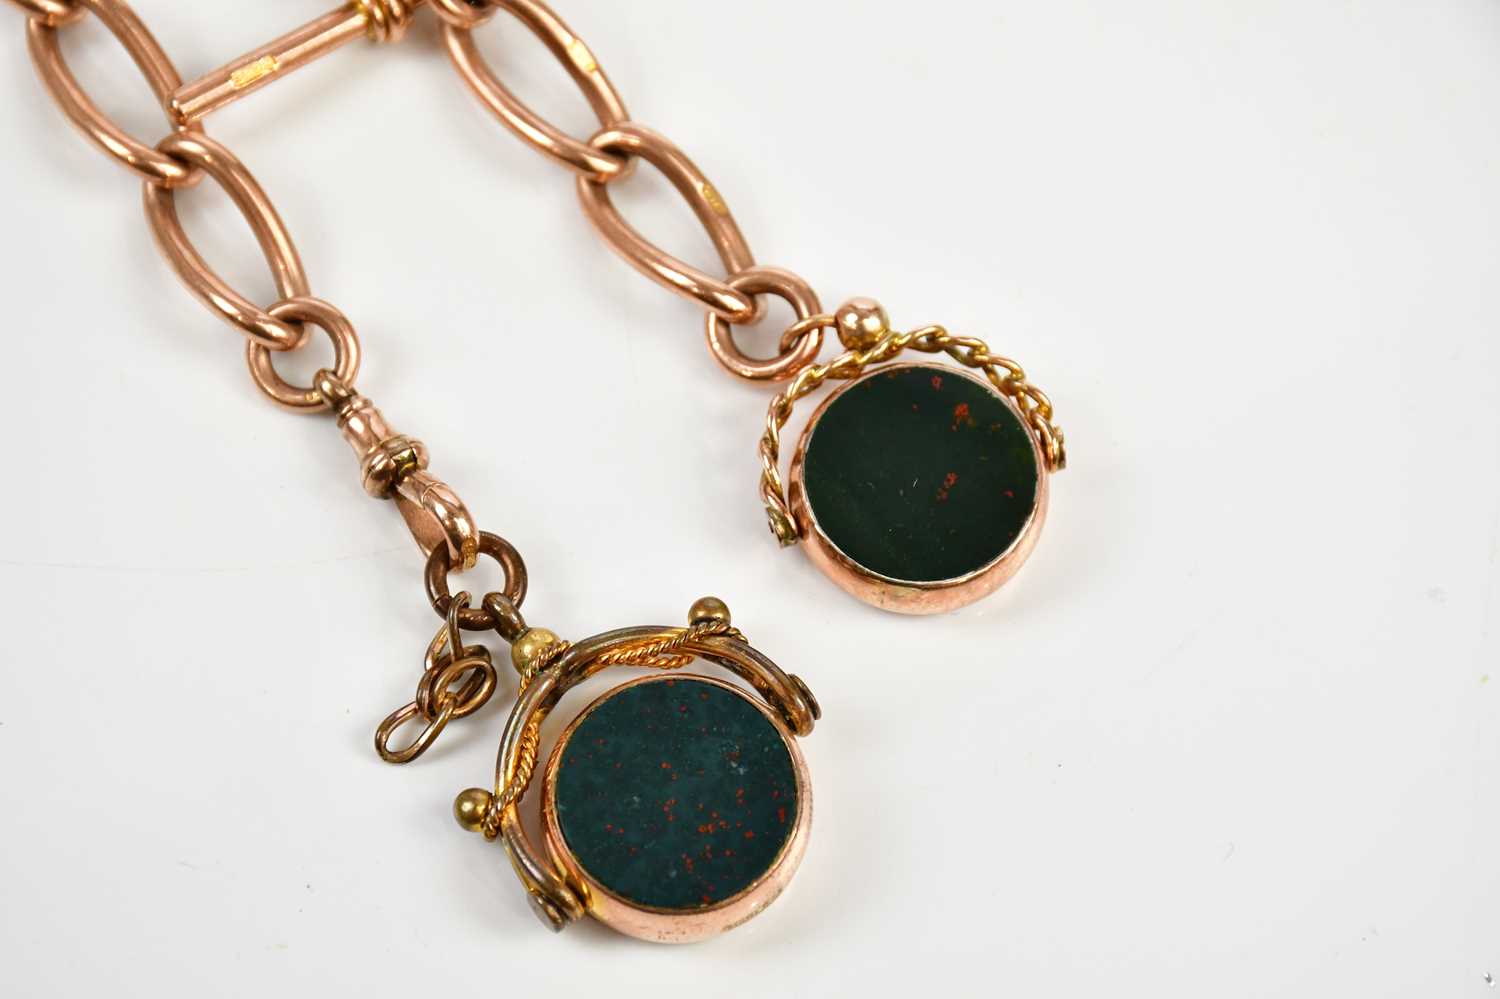 A 9ct yellow gold fob chain with two blood stone fobs, approximate weight 74.8g. - Image 2 of 4